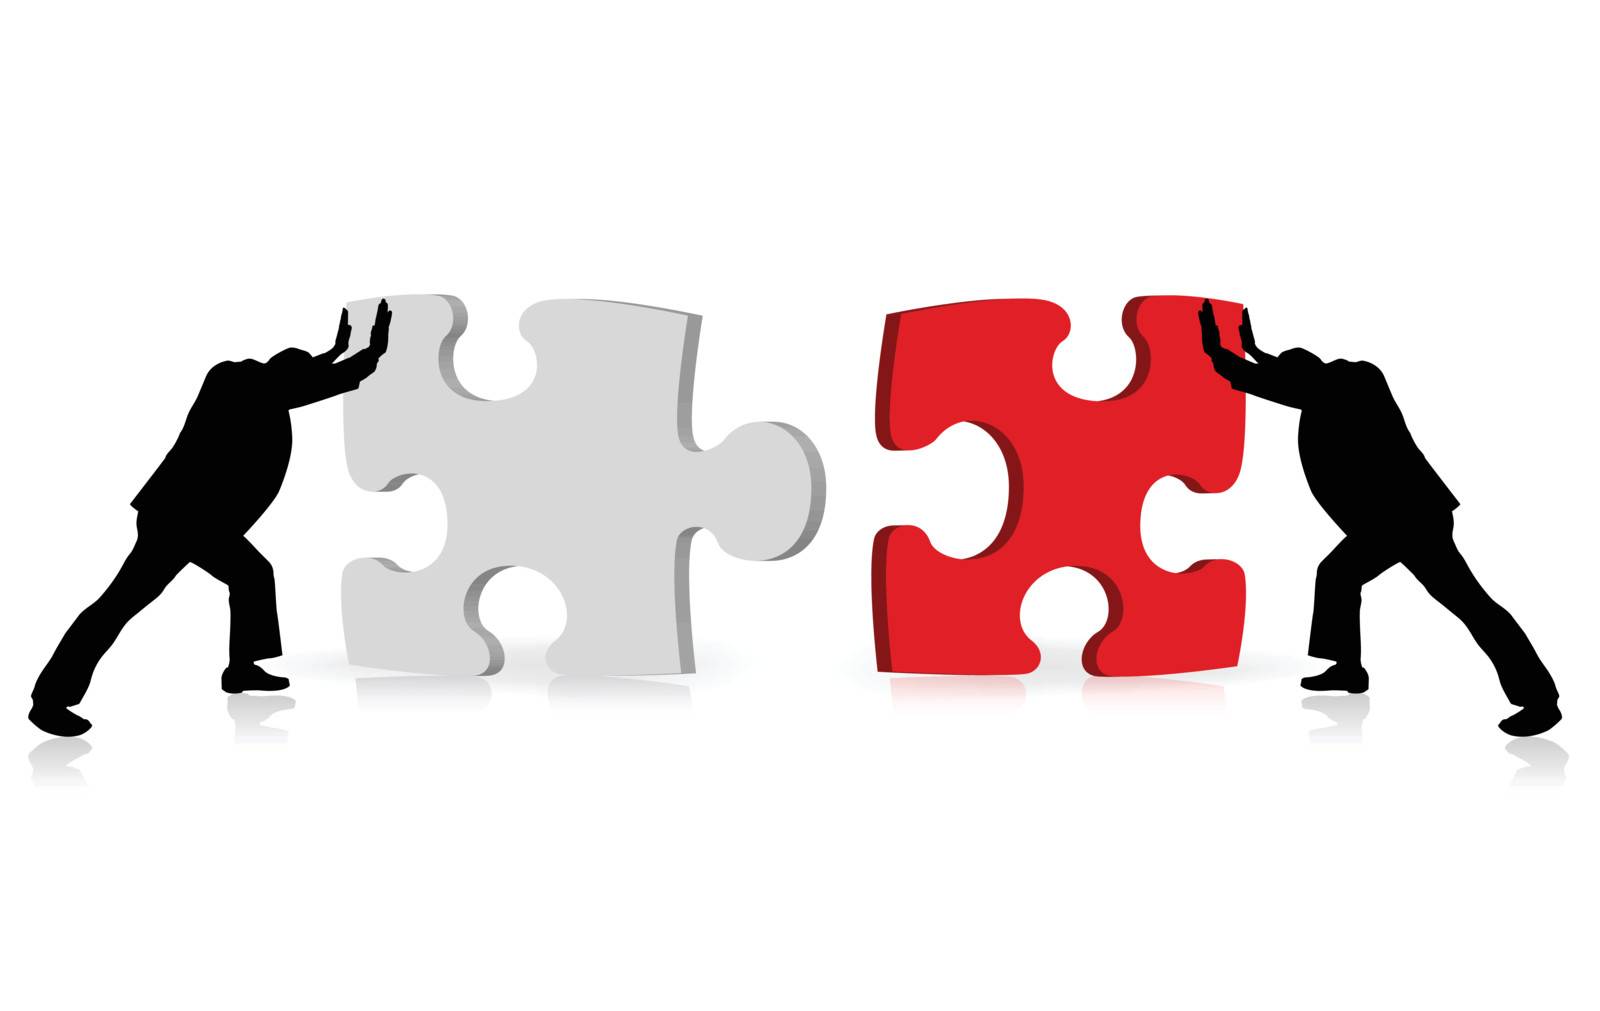 business concept of achievement of success illustrated via puzzle togetherness  by xprmntl